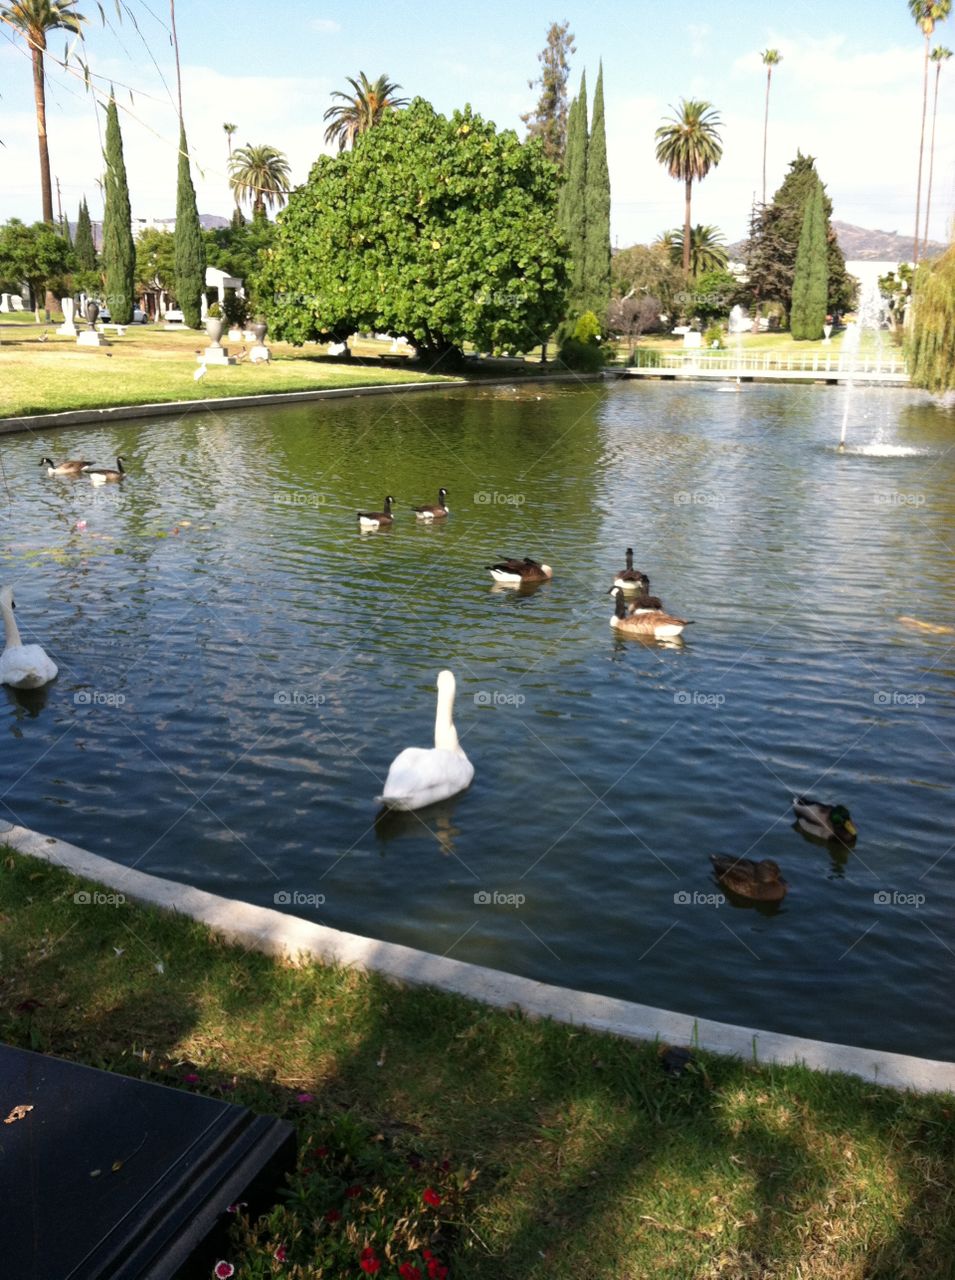 Pond at Cemetery with Ducks